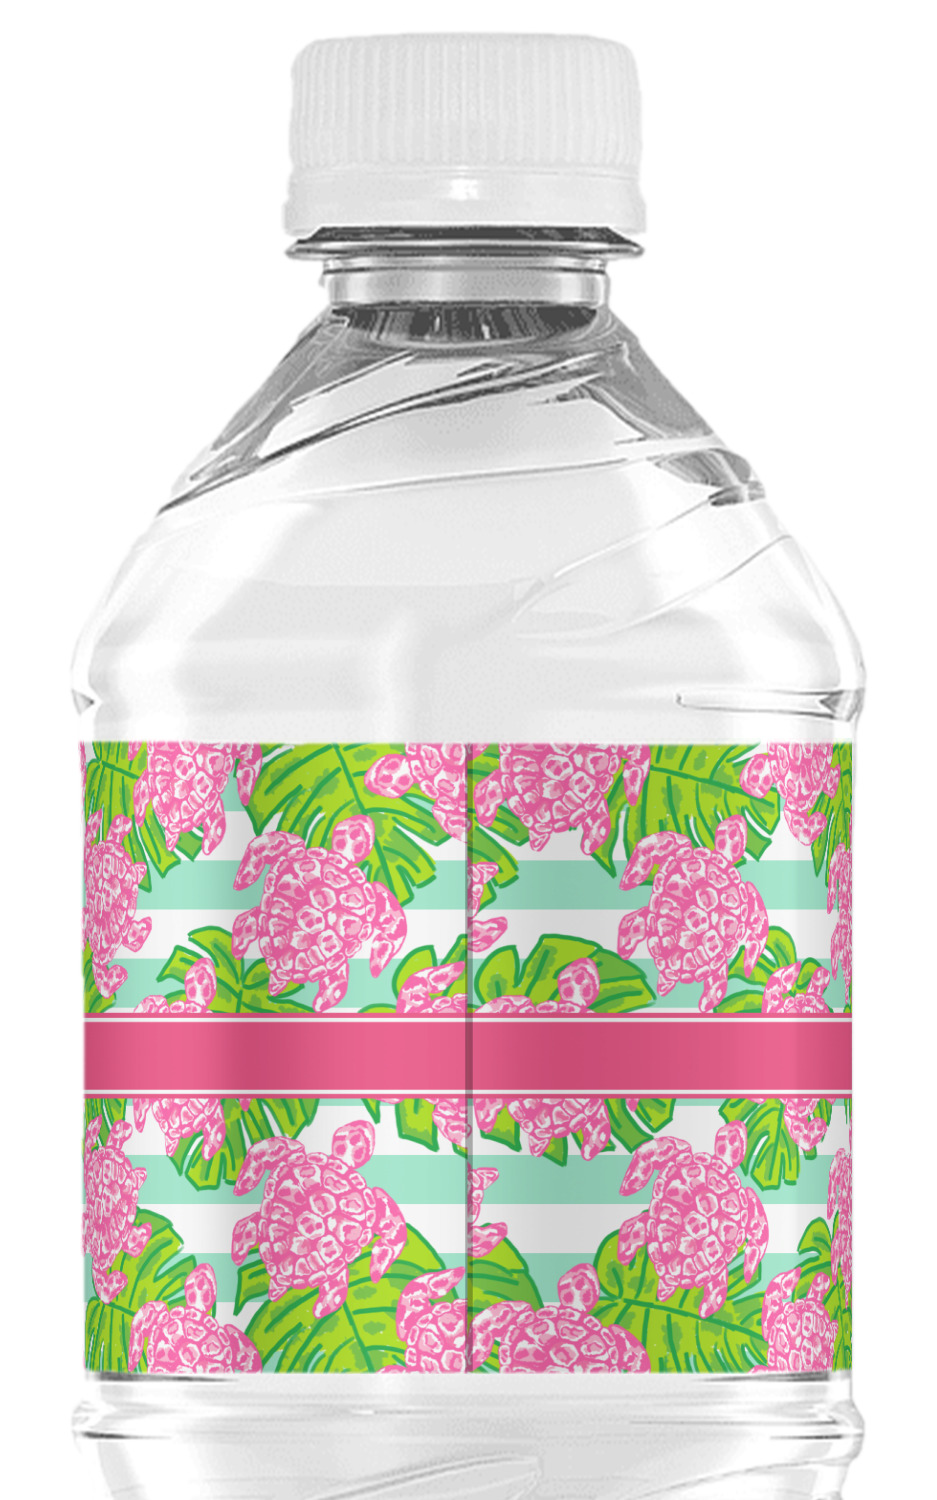 https://www.youcustomizeit.com/common/MAKE/1107405/Preppy-Water-Bottle-Label-Back-View.jpg?lm=1667578056